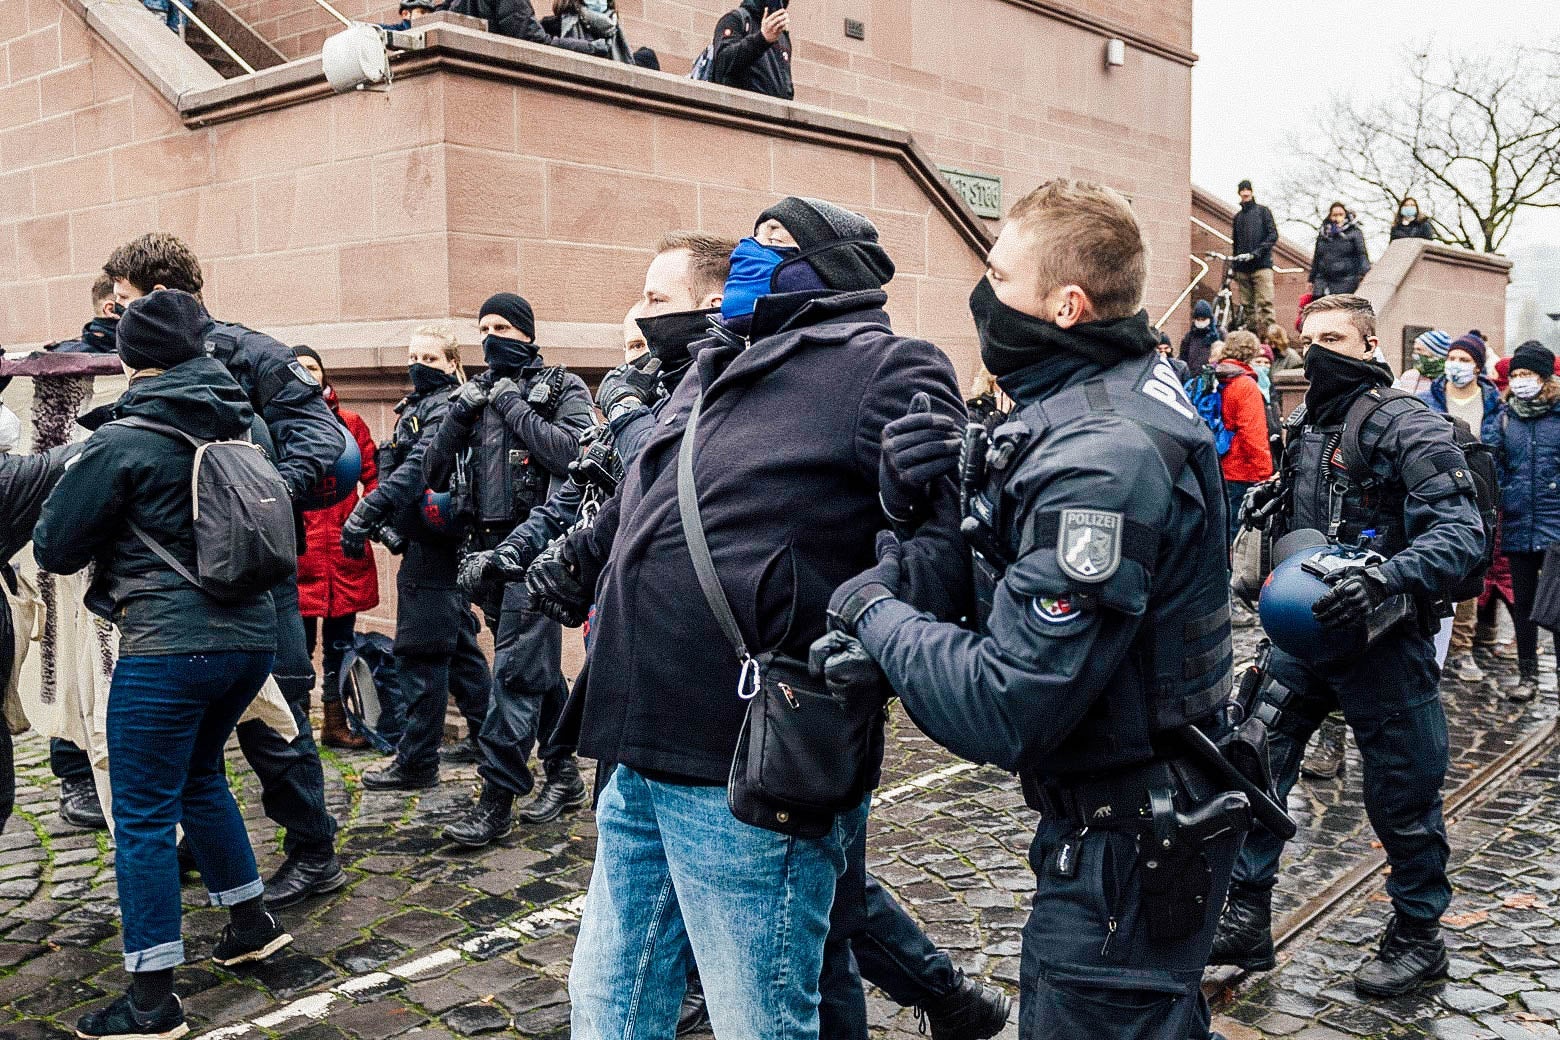 Police stand between Querdenken supporters and left-wing counterprotesters. In the foreground, two officers hold a man by both arms.